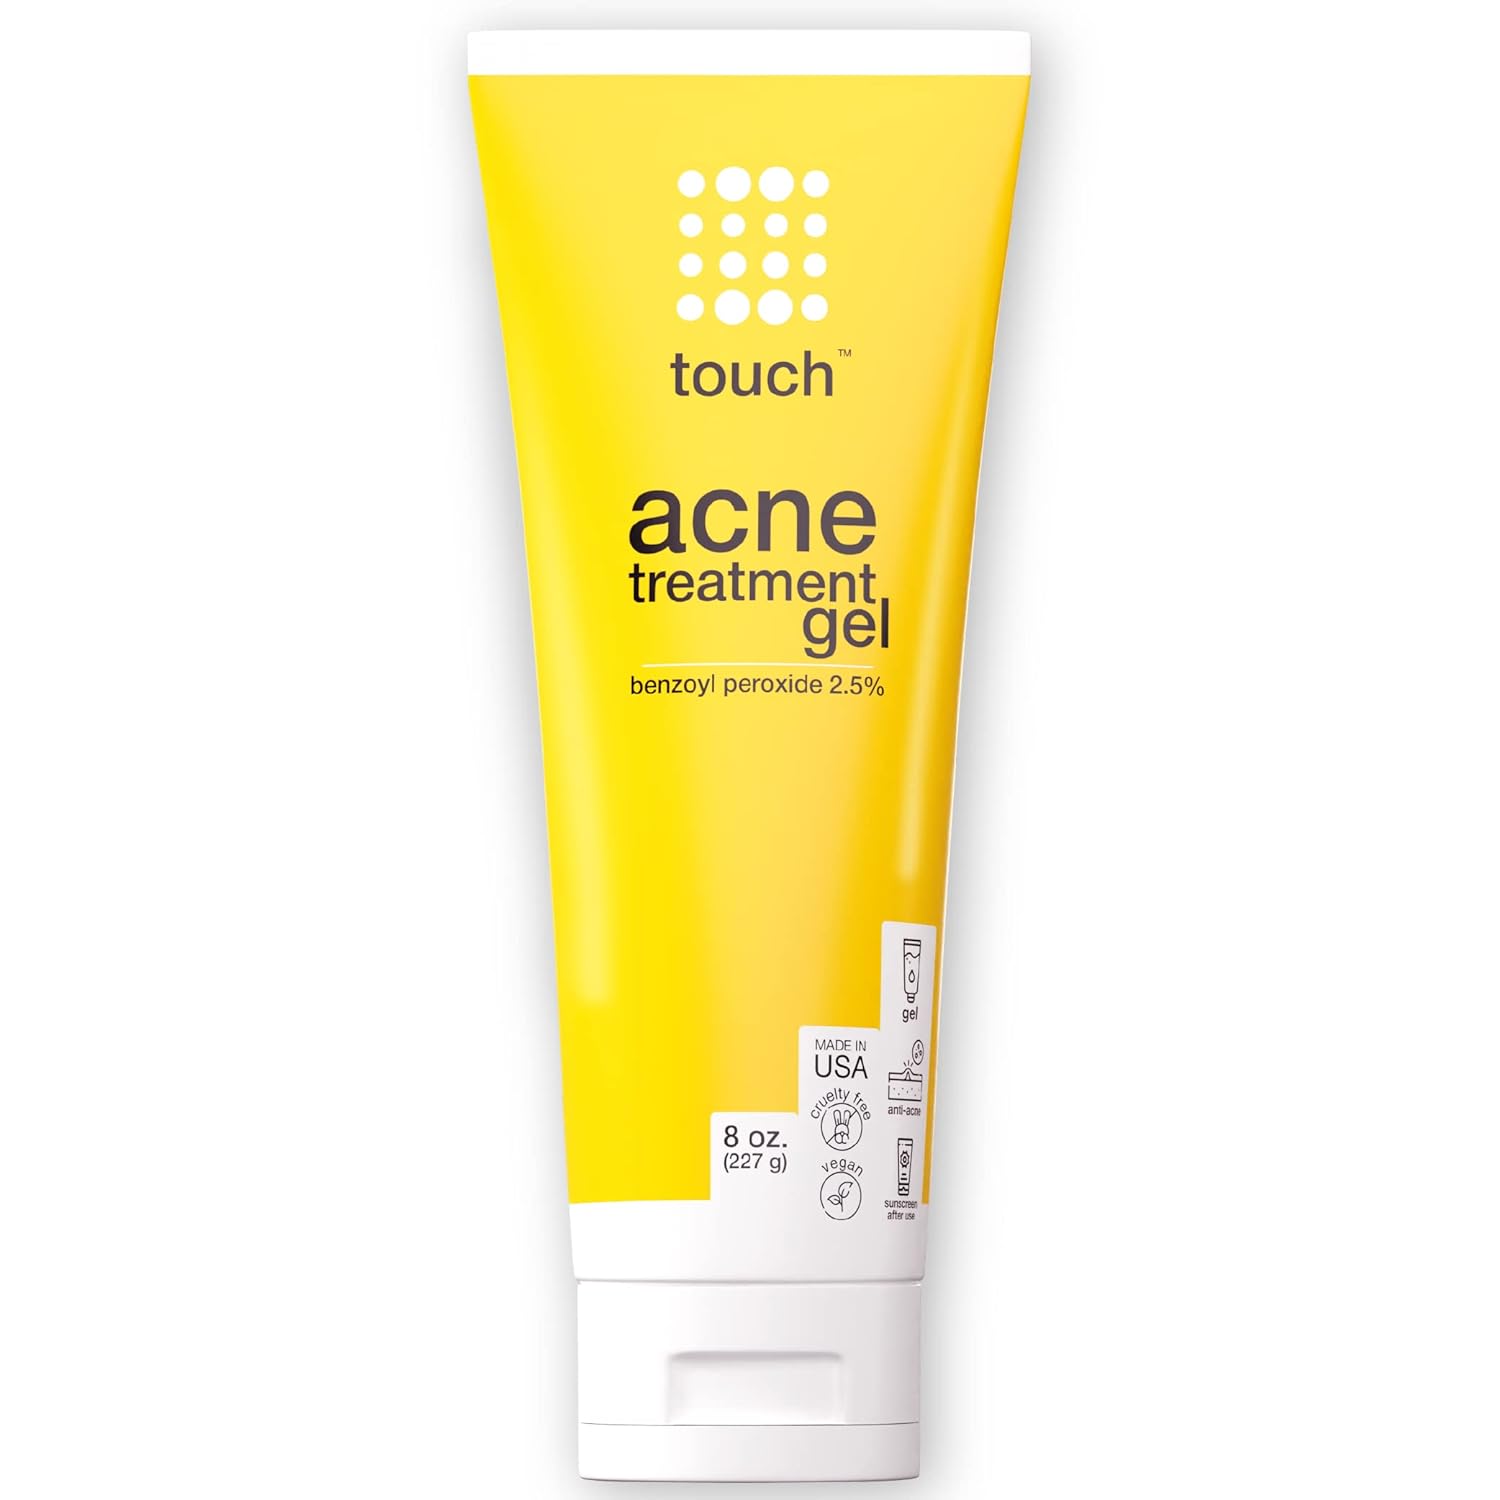 Touch Benzoyl Peroxide 2.5% Gel Cream For Acne - Pimples and Cystic Acne Spot & Daily Face and Back Medication for Adults & Teens – Goes on Clear Lightweight & Non-Drying - Large 8 oz